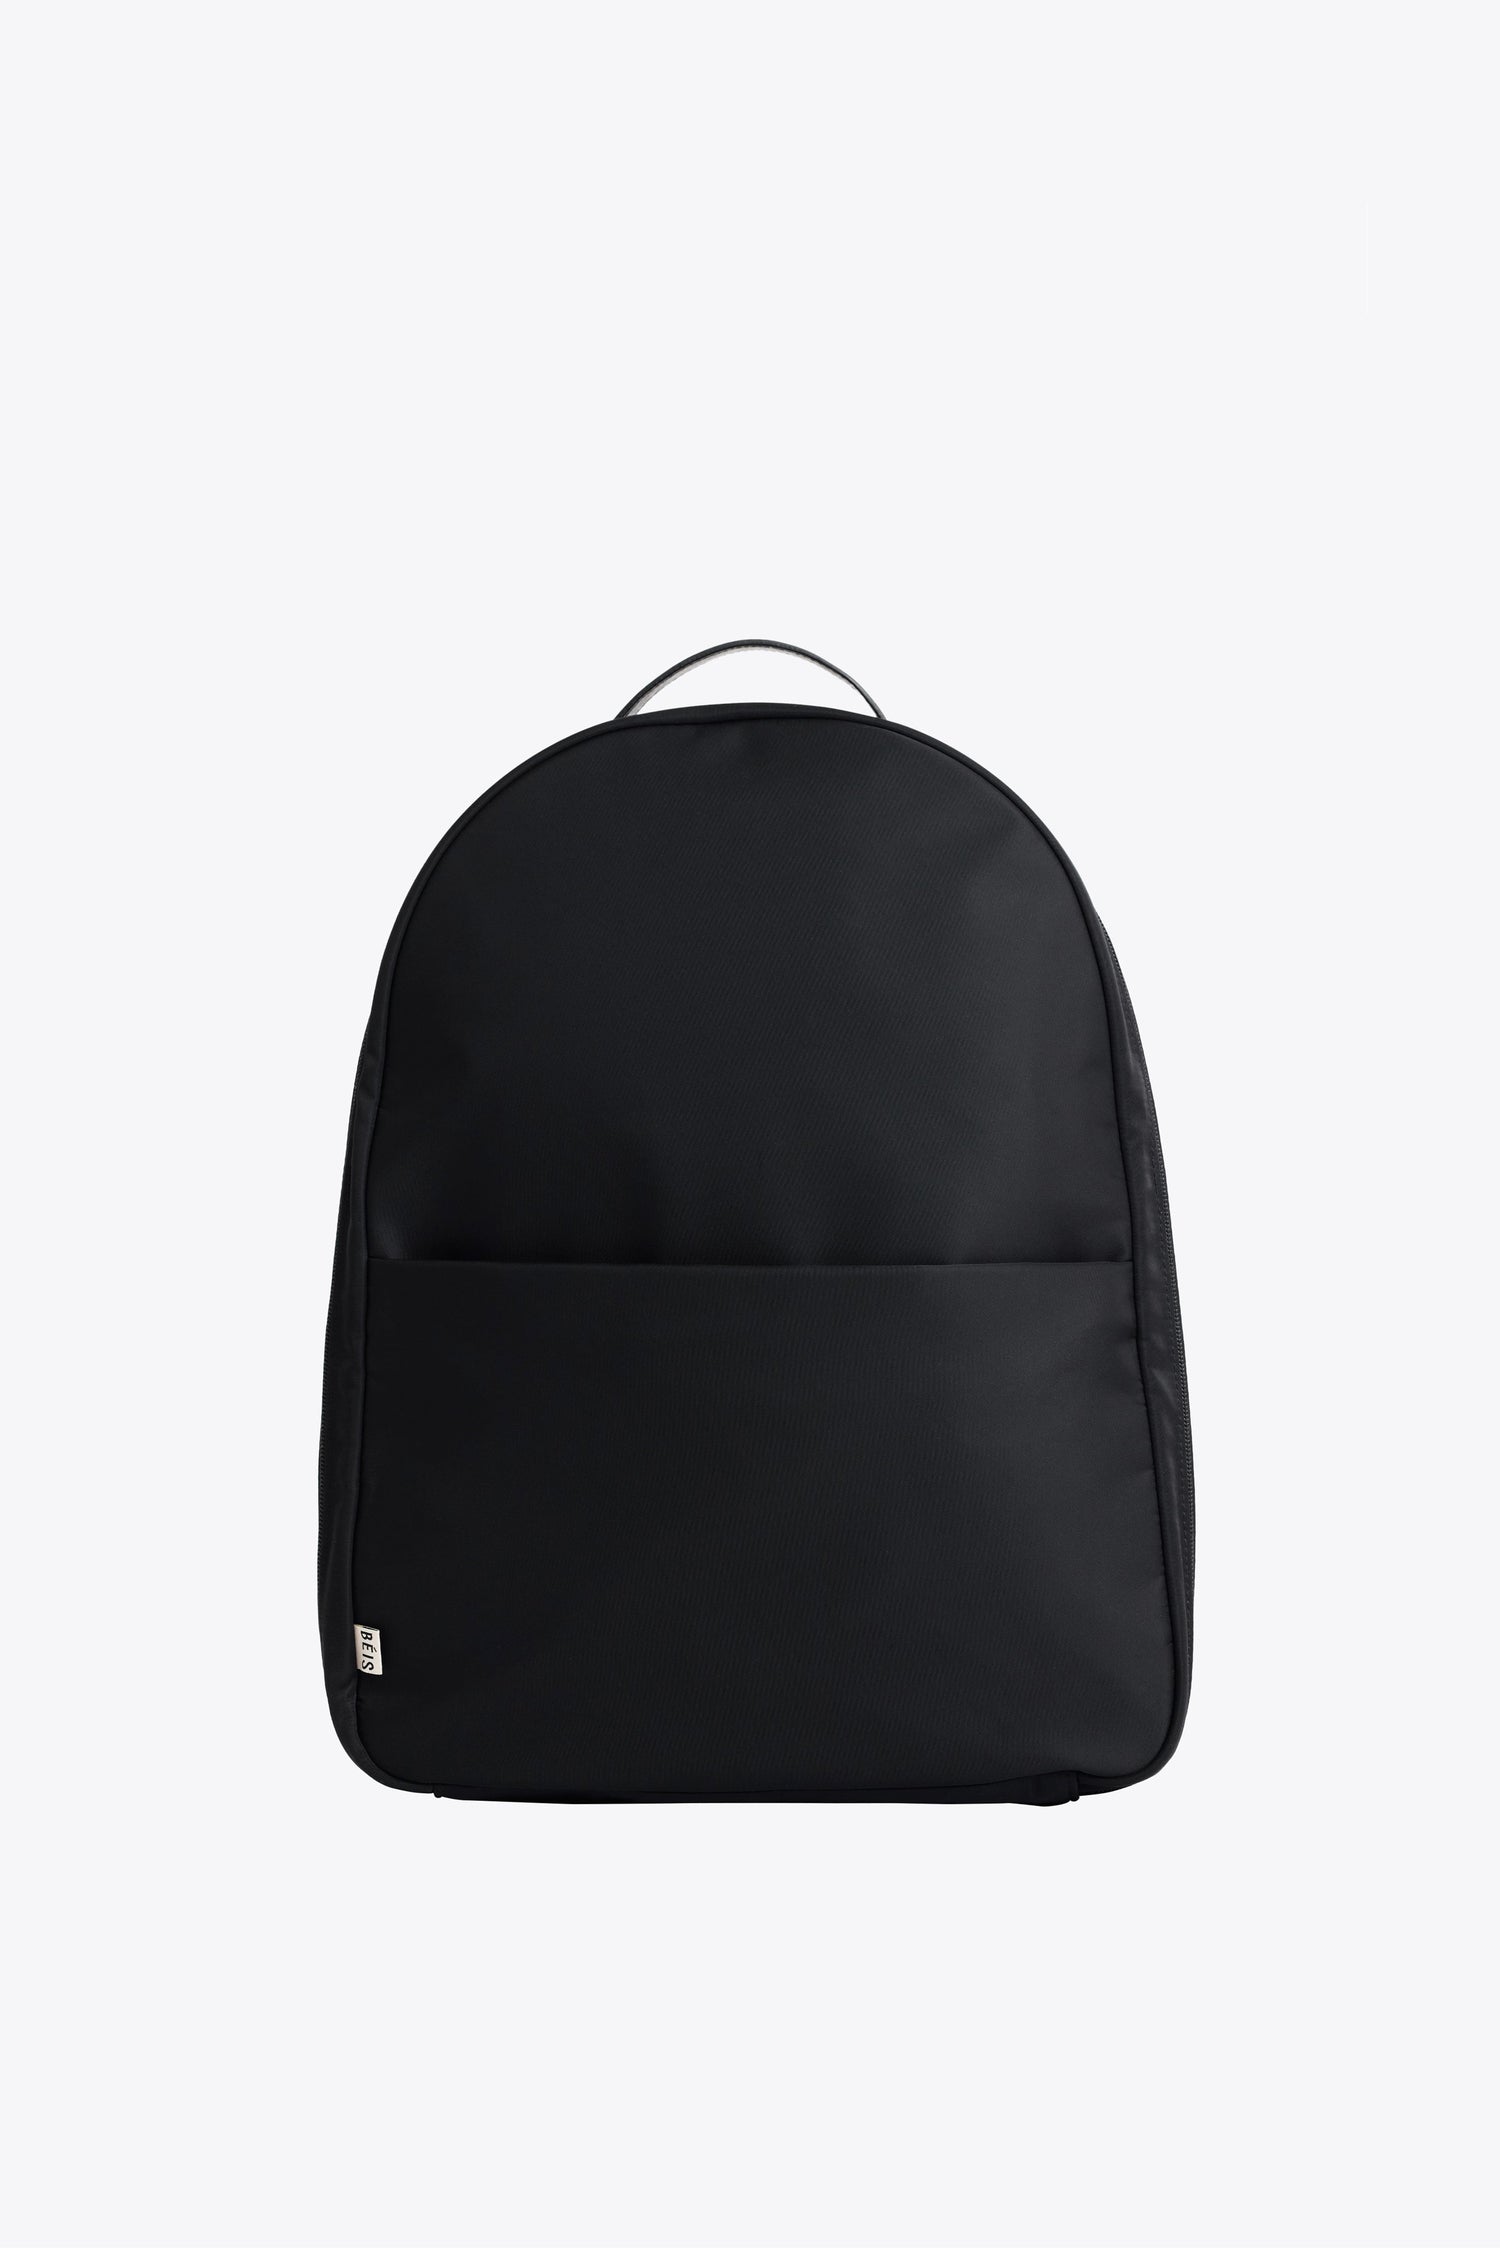 The Commuter Backpack Colors